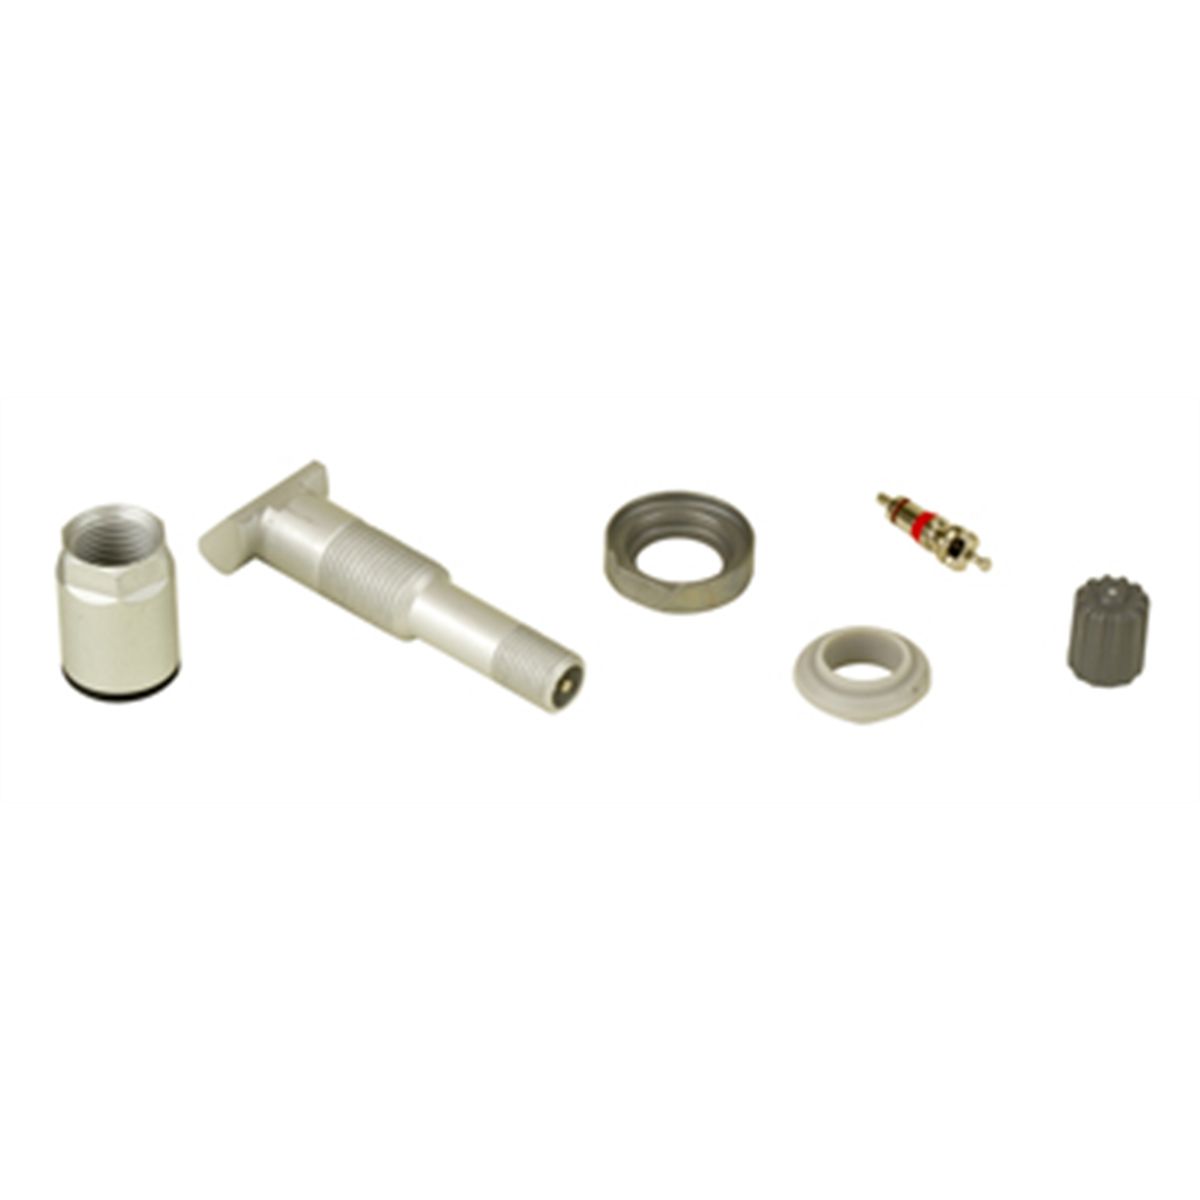 TPMS Replacement Parts Kits